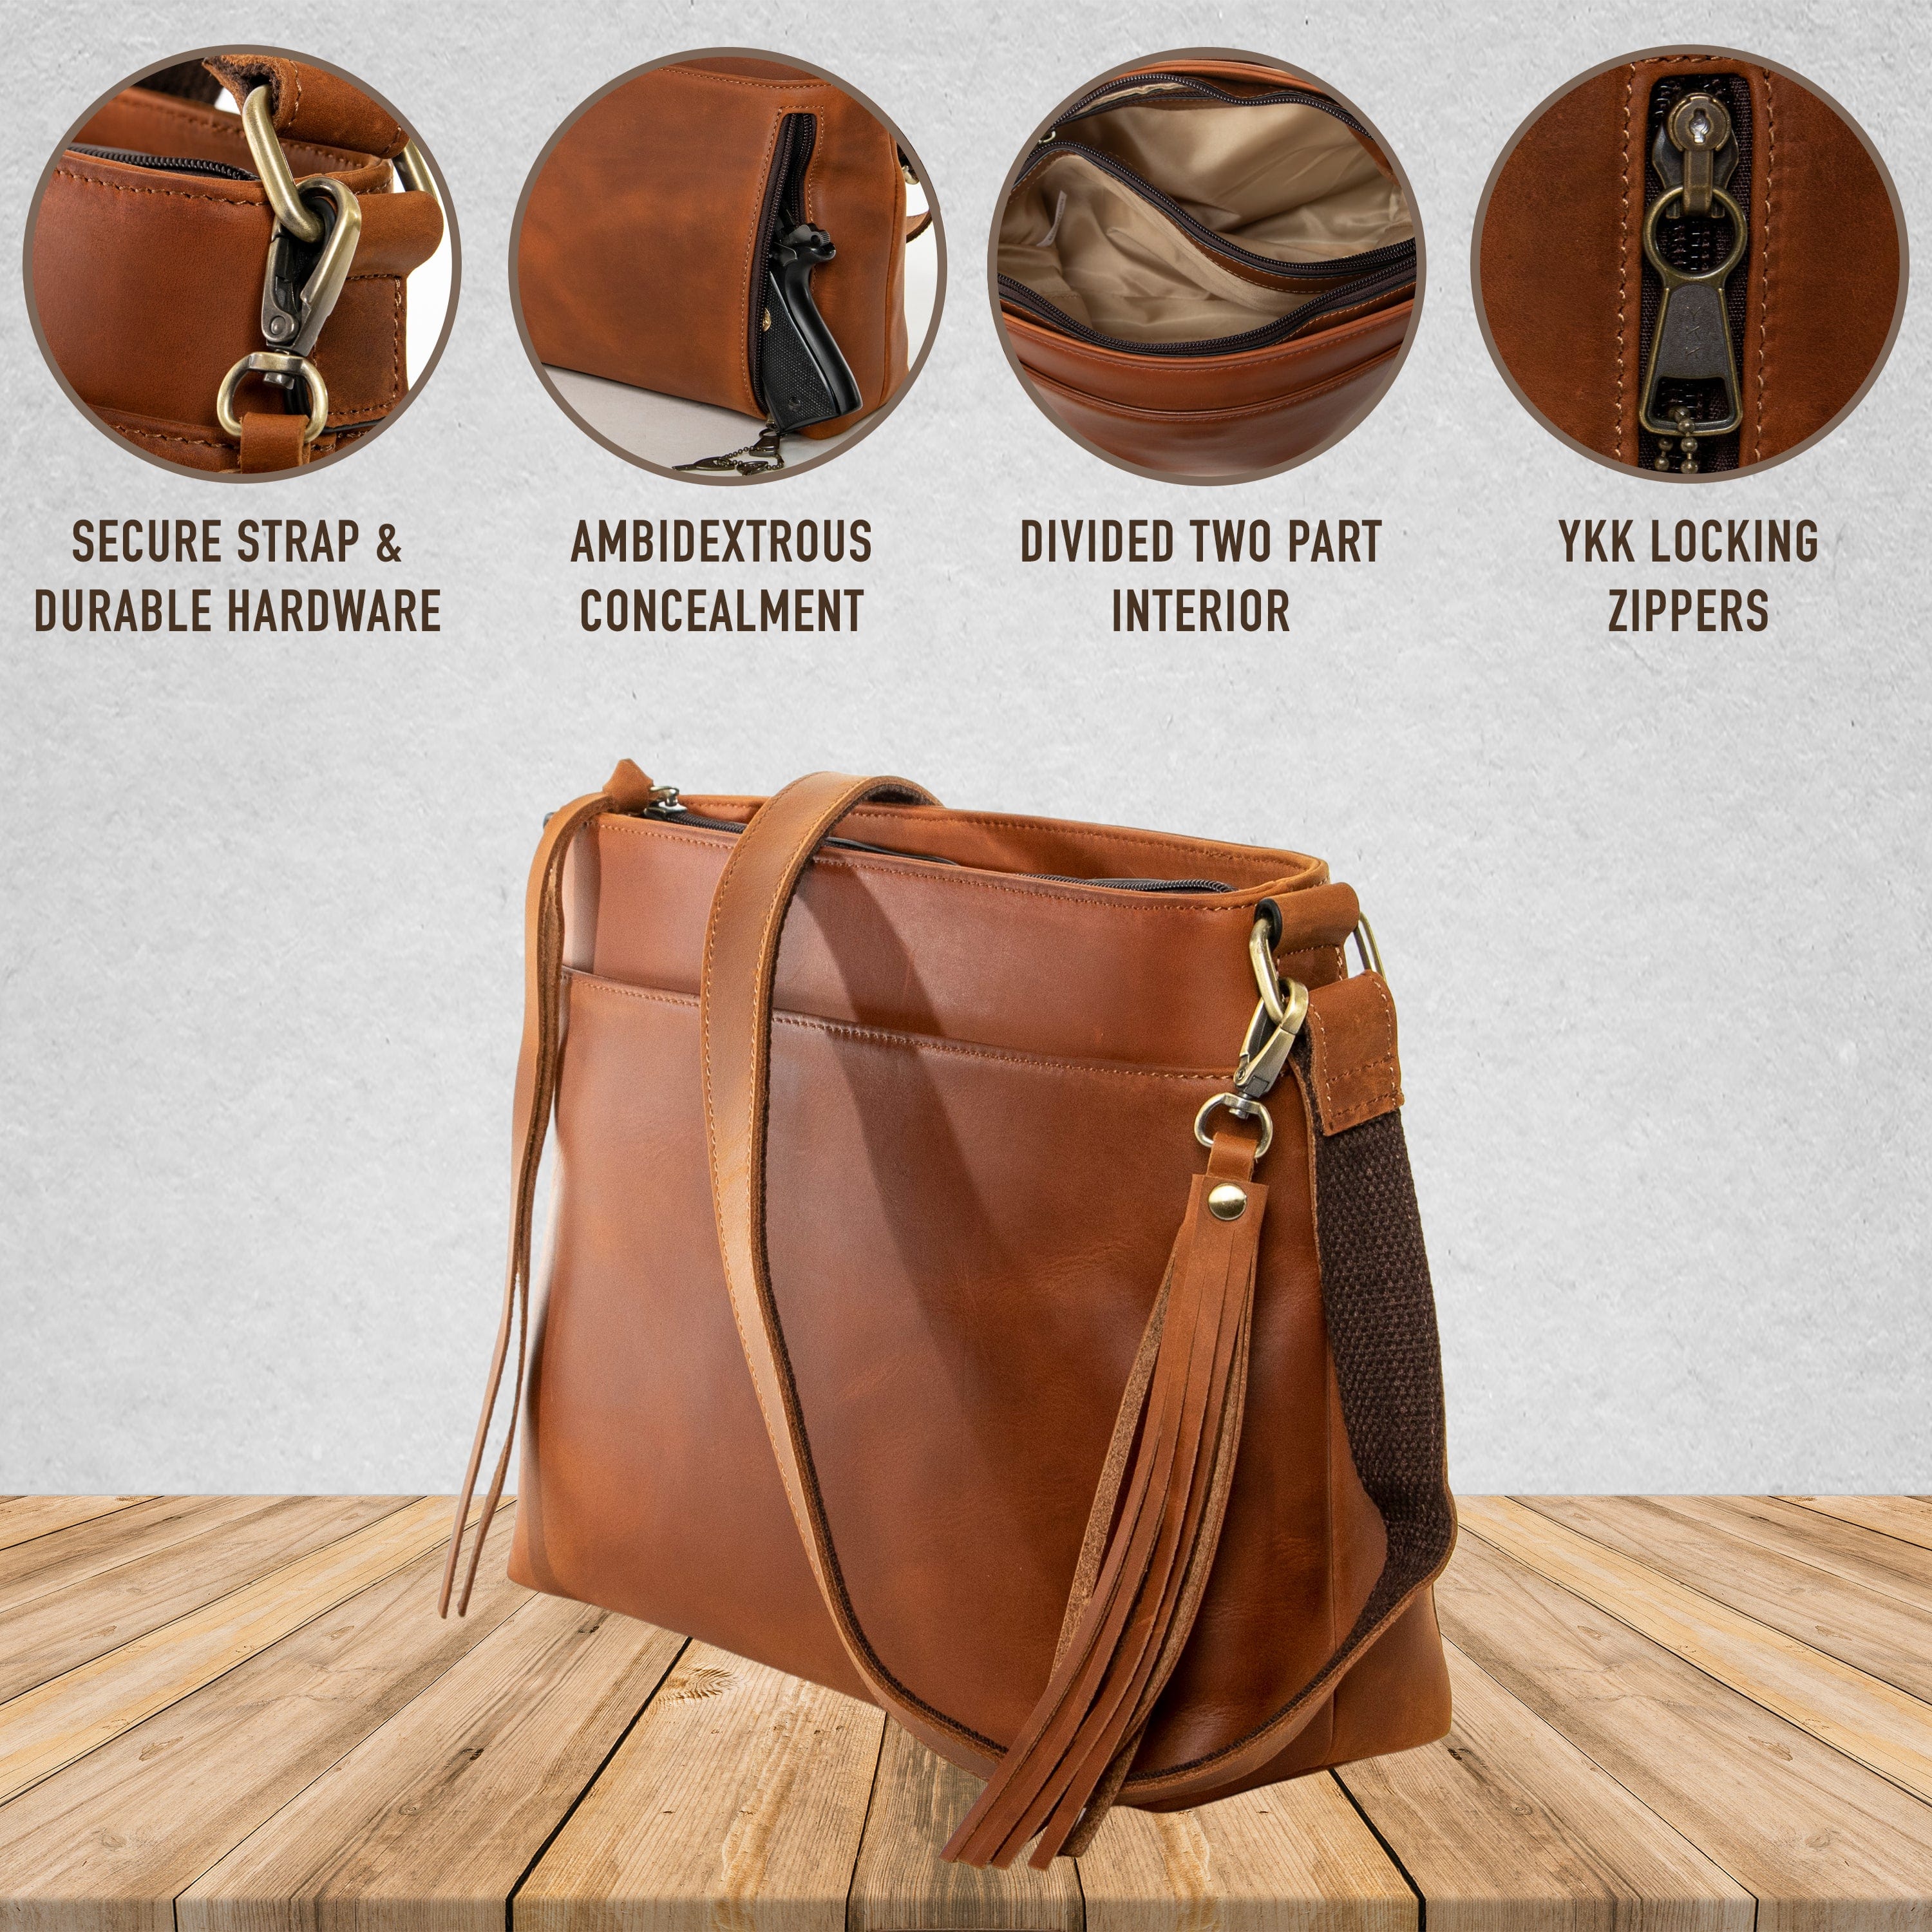 Concealed Carry Josie Leather Crossbody -  Lady Conceal -  Concealed Carry Purse -   soft leather shoulder bags for women's -  crossbody bags for everyday use -  most popular crossbody bag -  crossbody bags for guns -  crossbody handgun bag -  Unique Hide Purse -  Conceal Carry Western Purse -  Stylish Carry Josie Leather Bag -  Bag for Conceal Carrying Women - Gun Bag for Women